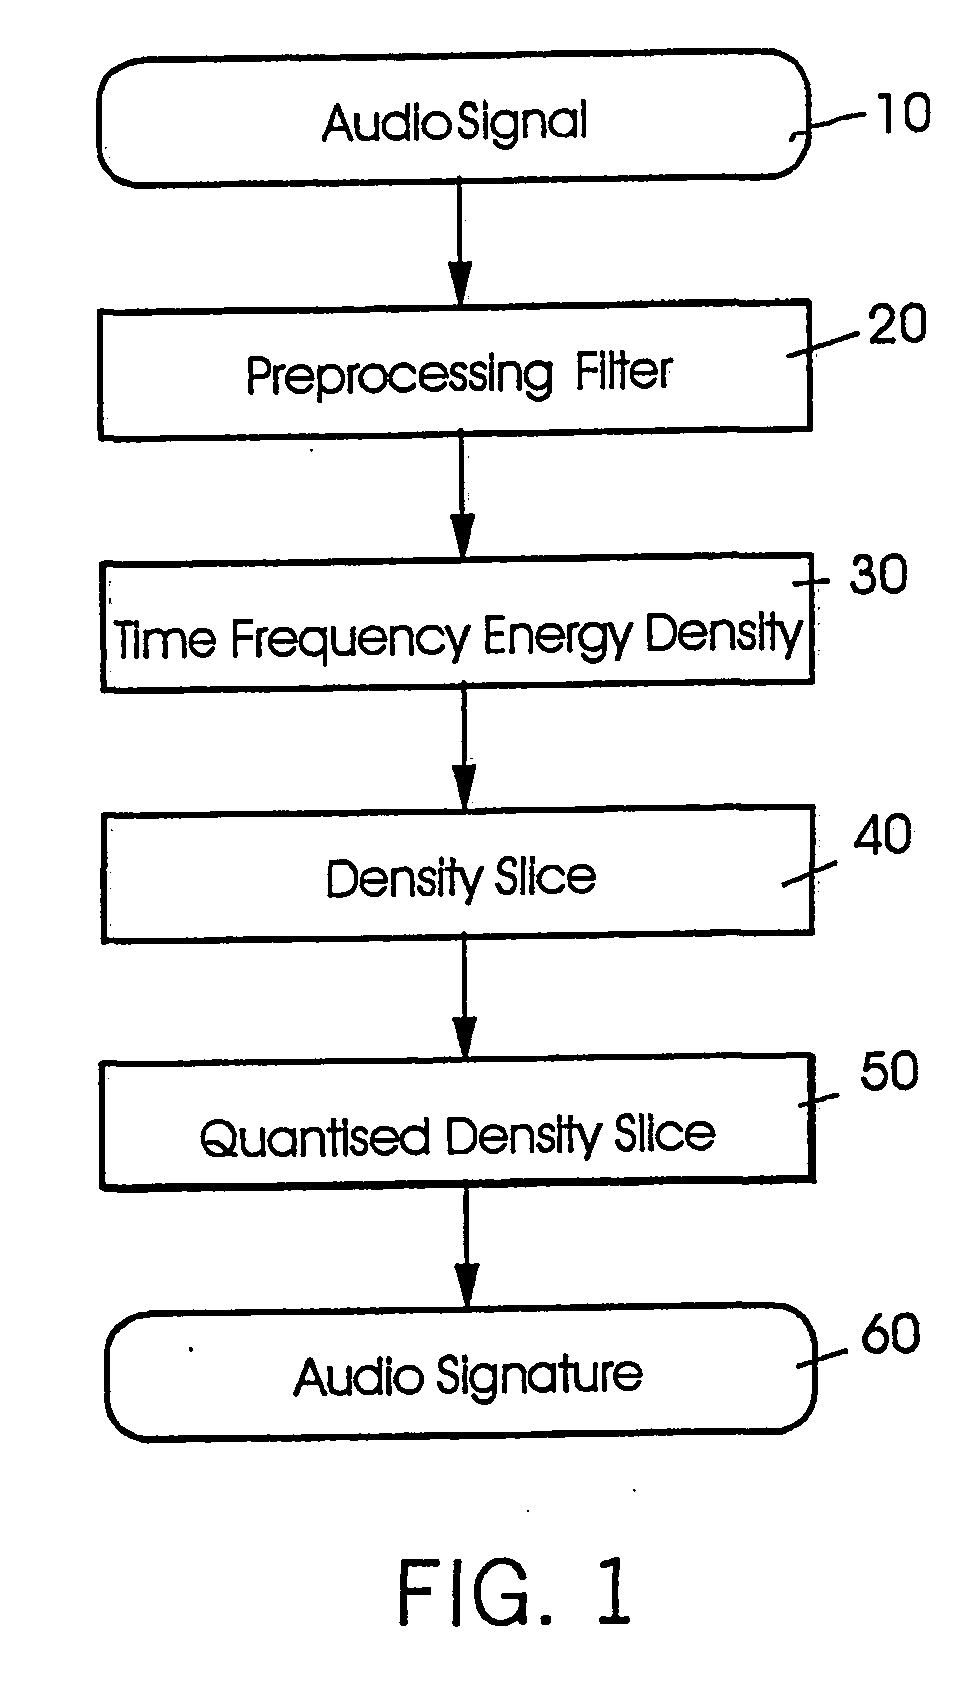 Method and system for the automatic detection of similar or identical segments in audio recordings